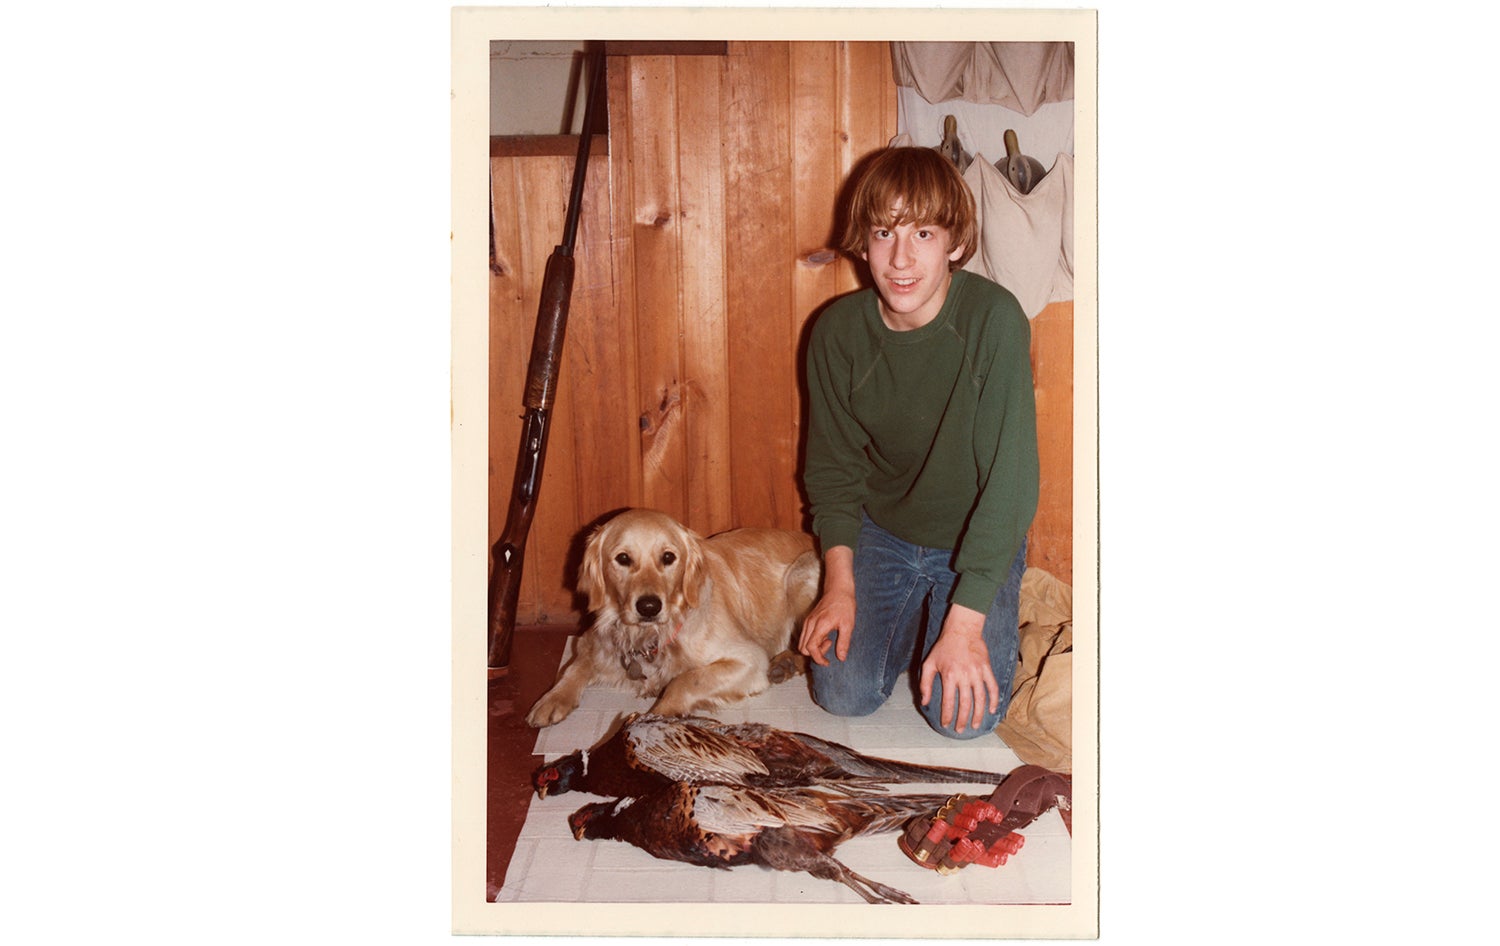 Young Scott Bestul with dog and pheasants